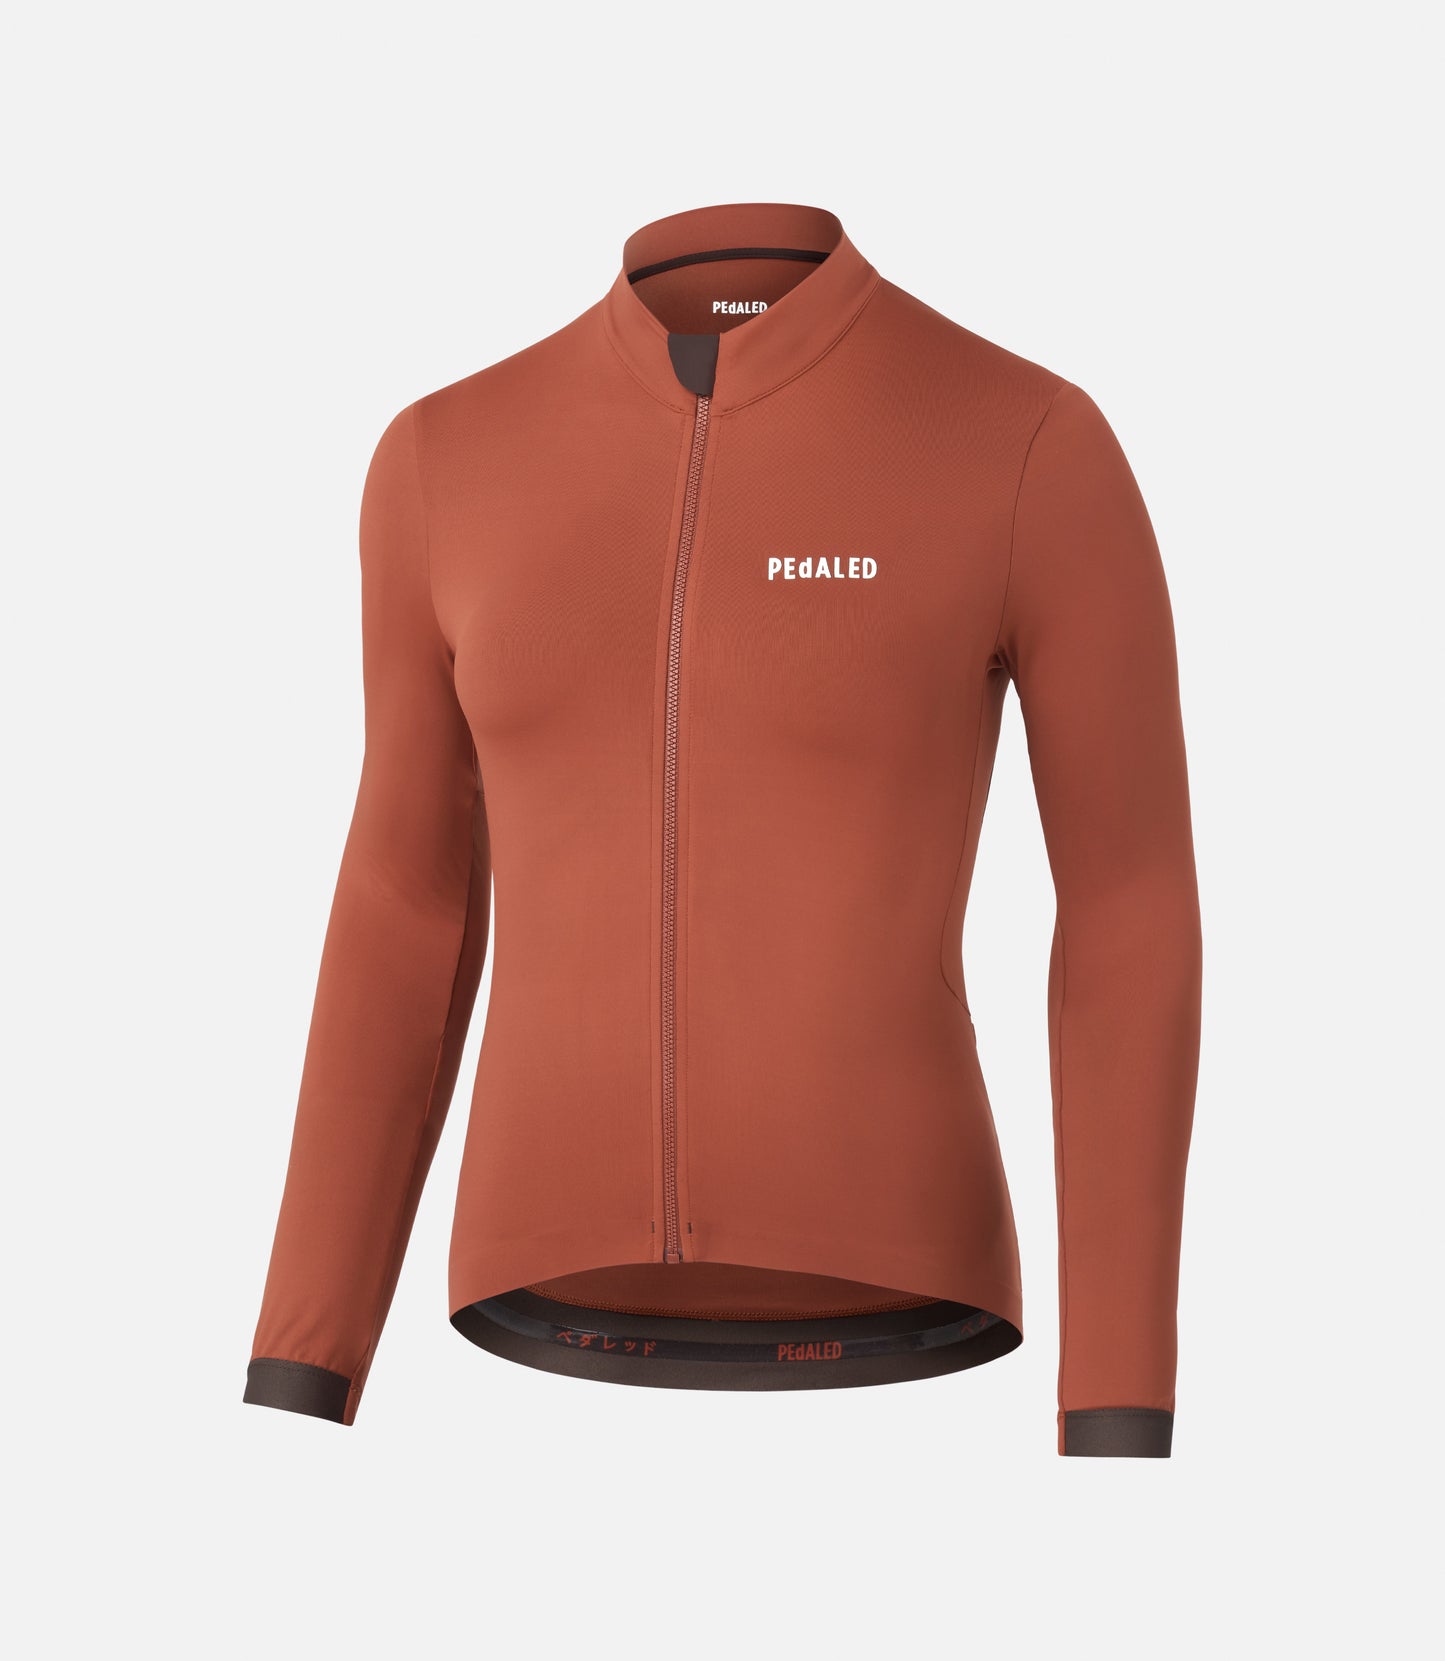 PEdALED WOMEN'S ESSENTIAL LONG SLEEVE JERSEY - BURNT HENNA